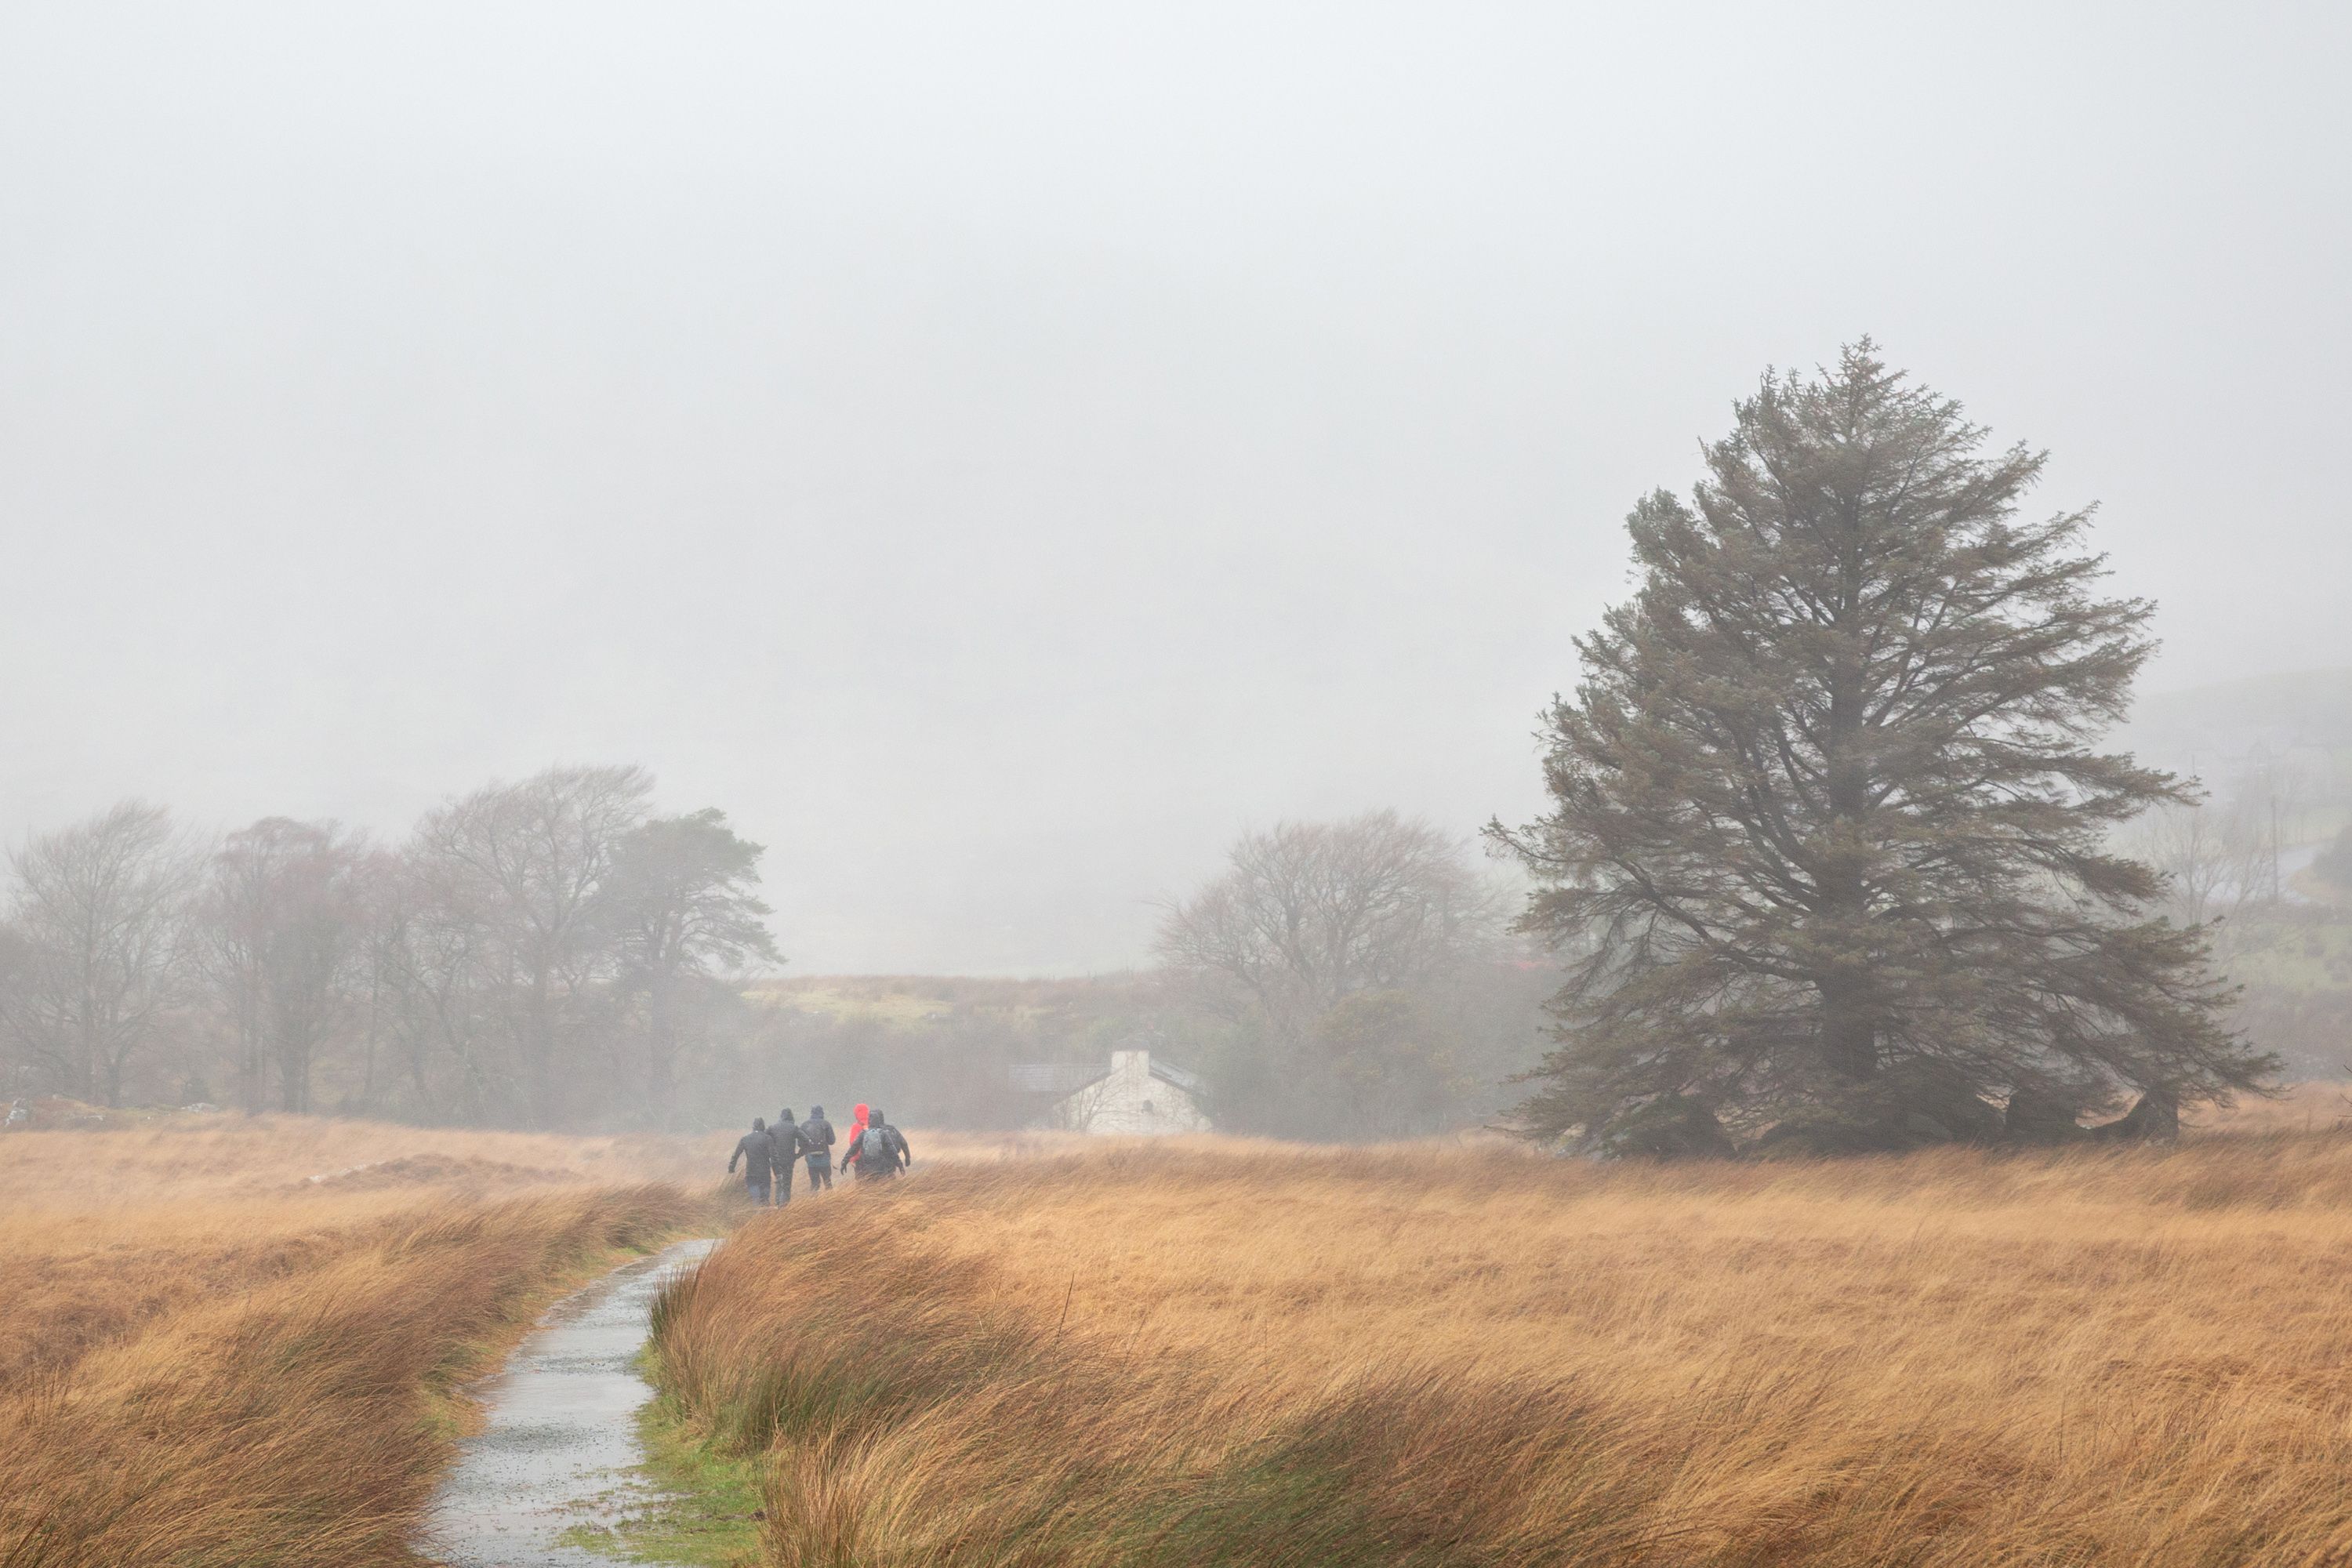 A group of people in weatherproof gear walking down a path in the distance next to a large tree in the mist